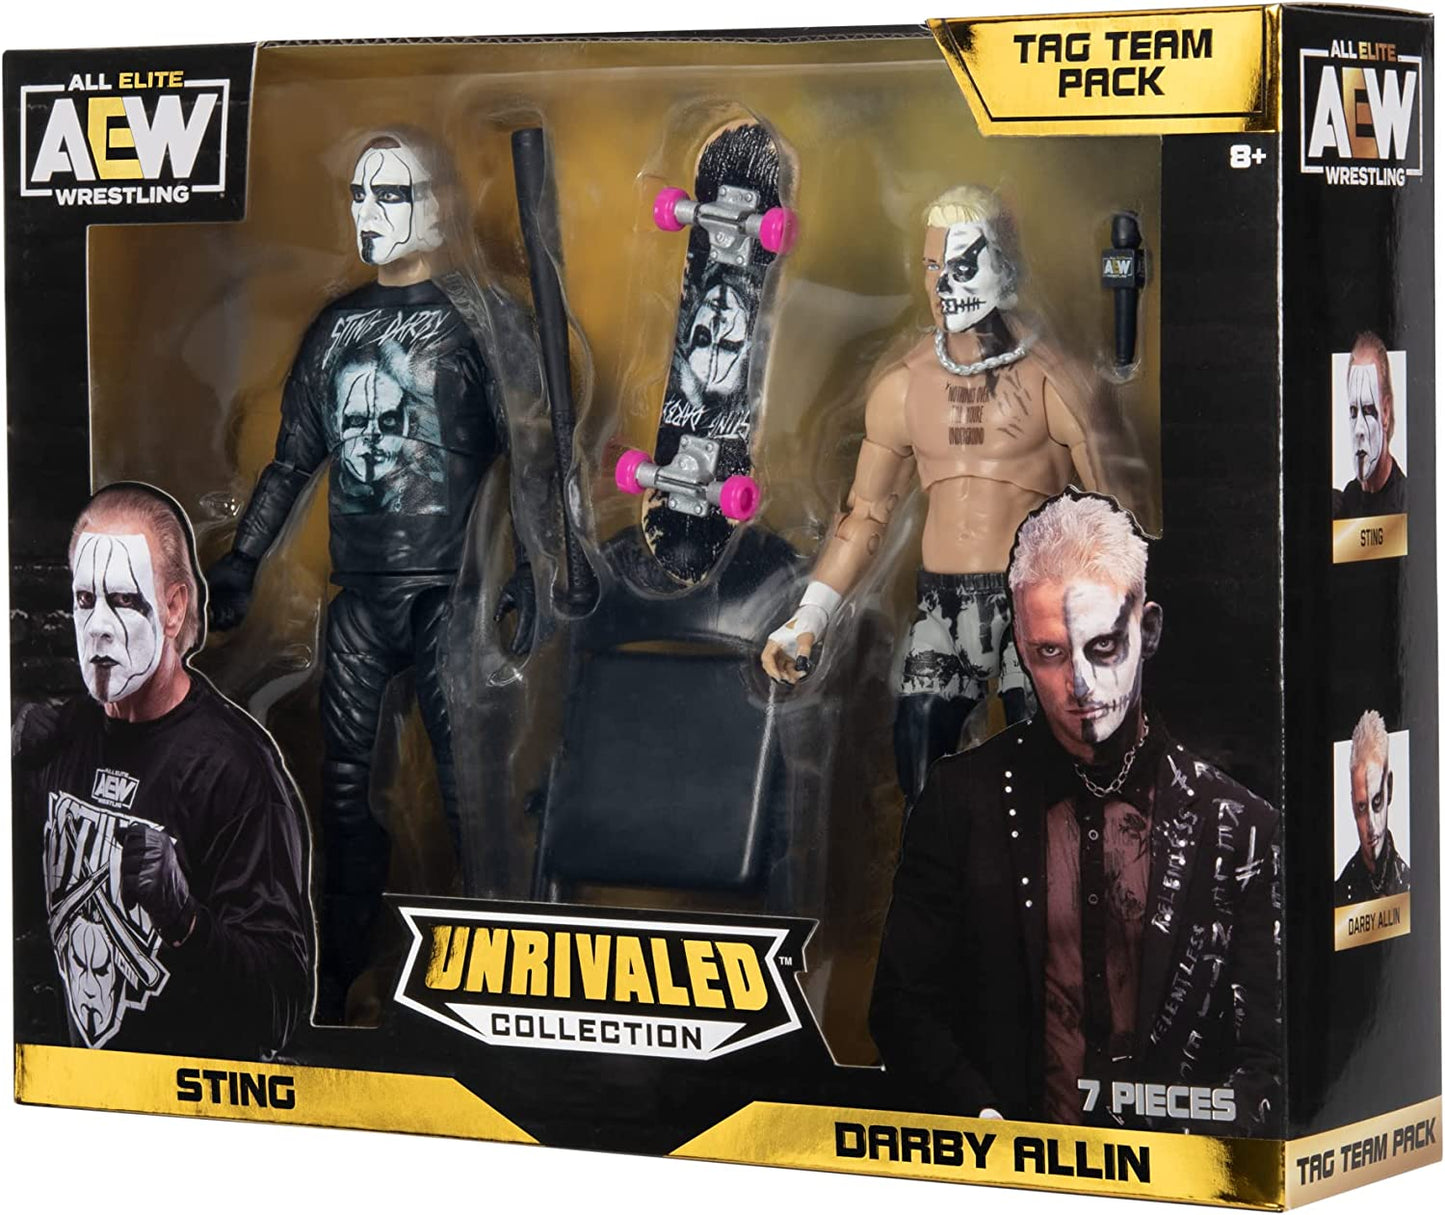 2022 AEW Jazwares Unrivaled Collection Amazon Exclusive Sting & Darby Allin Tag Team Pack